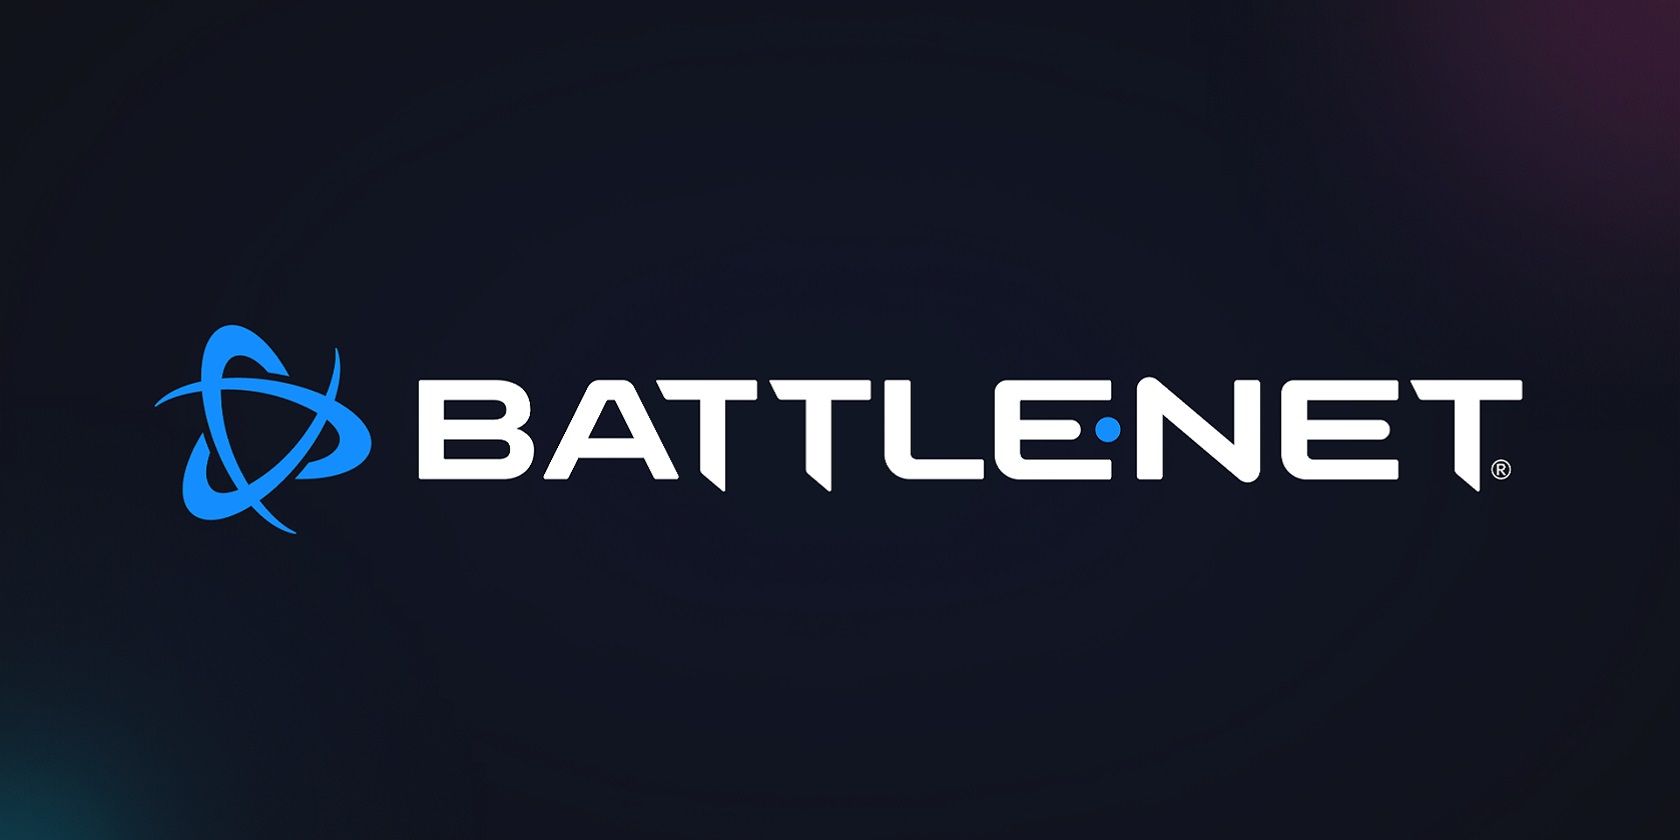 How to Fix Battle.net Not Opening on a Windows 11/10 PC